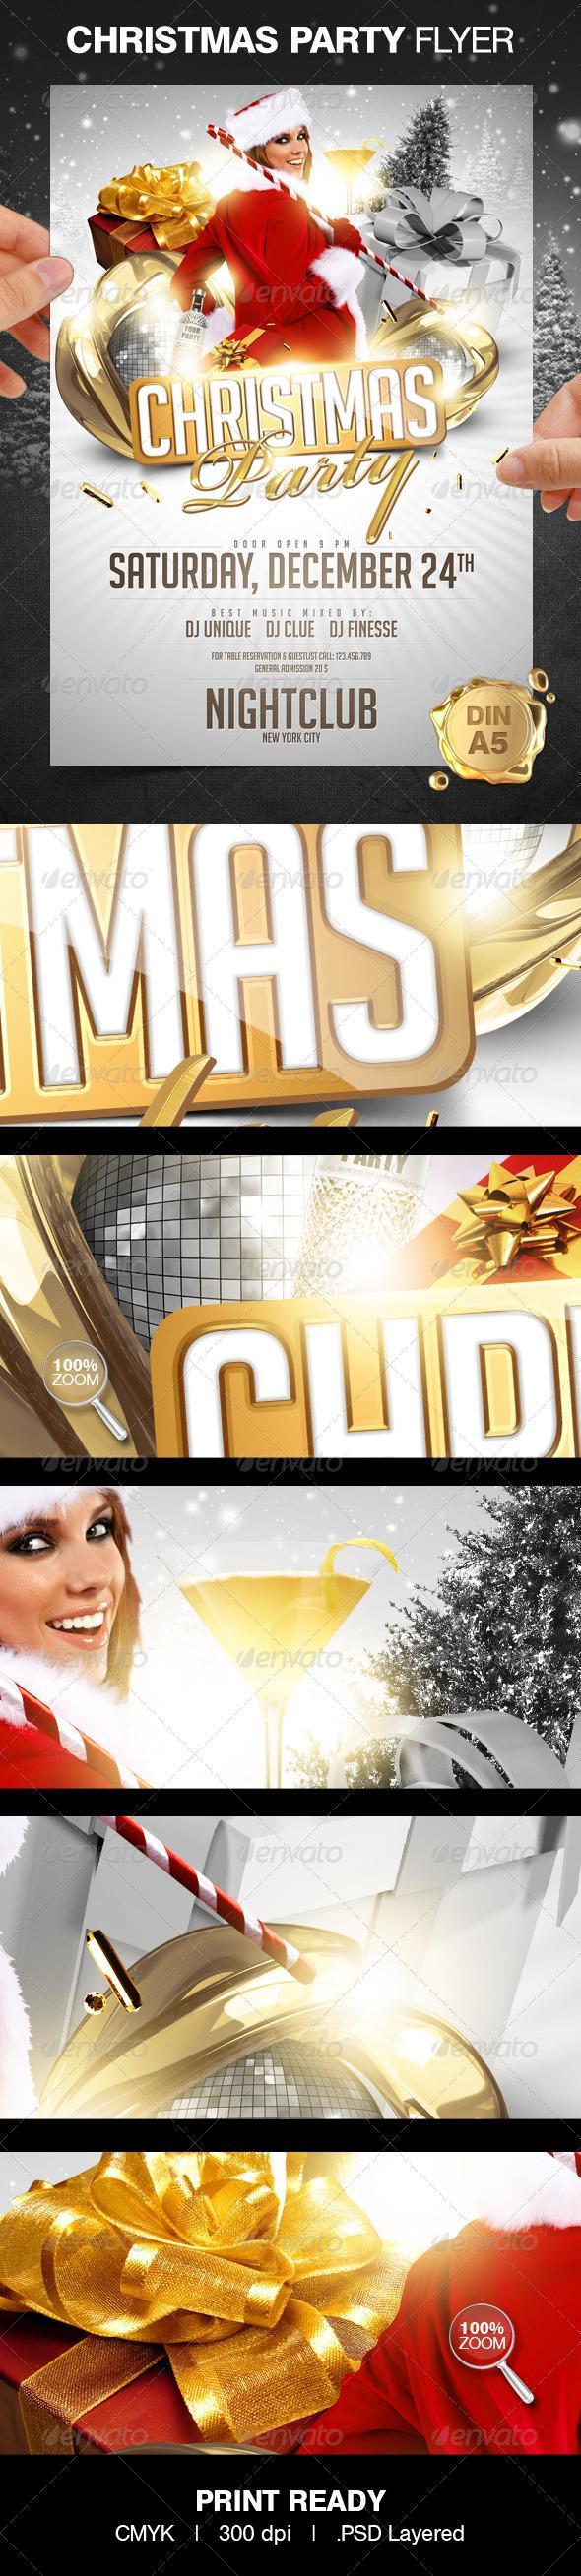 Christmas Party Flyer Design Poster preview